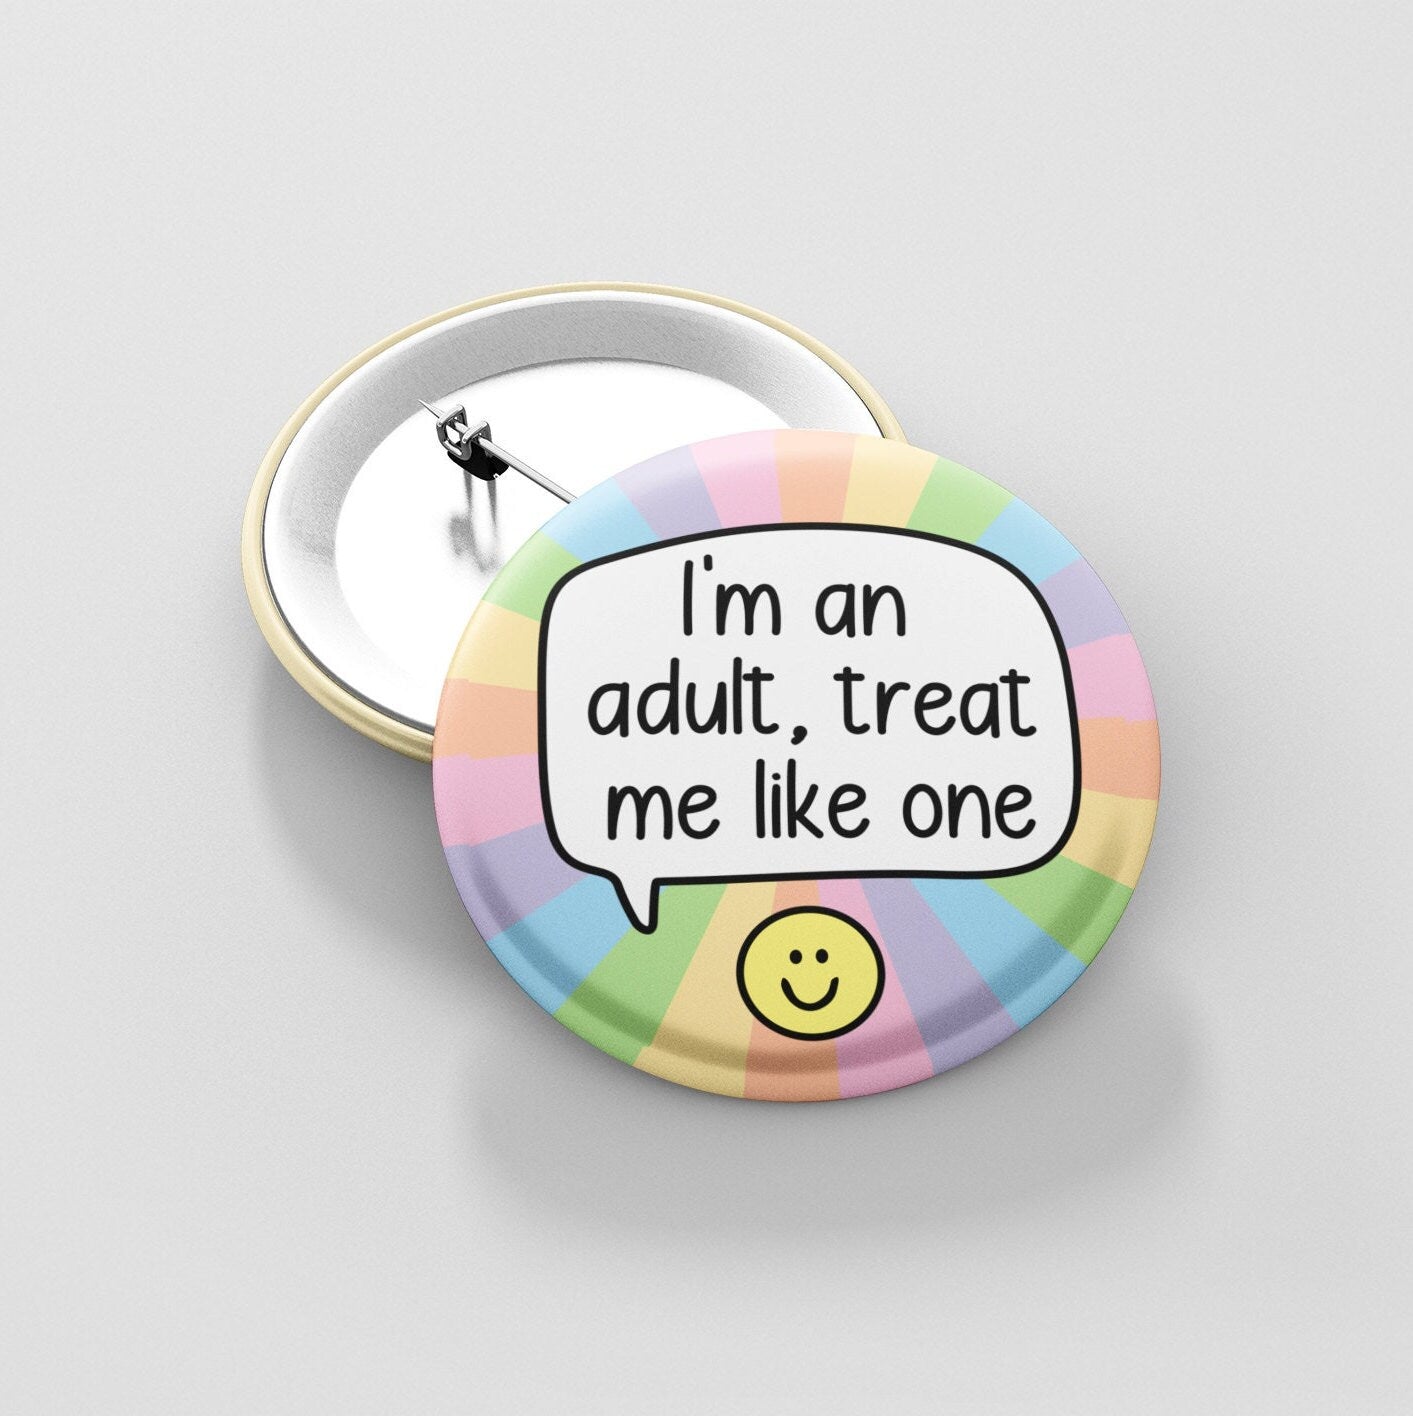 I'm An Adult, Treat Me Like One - Badge Pin | Actually Autistic, ADHD, Neurodivergent